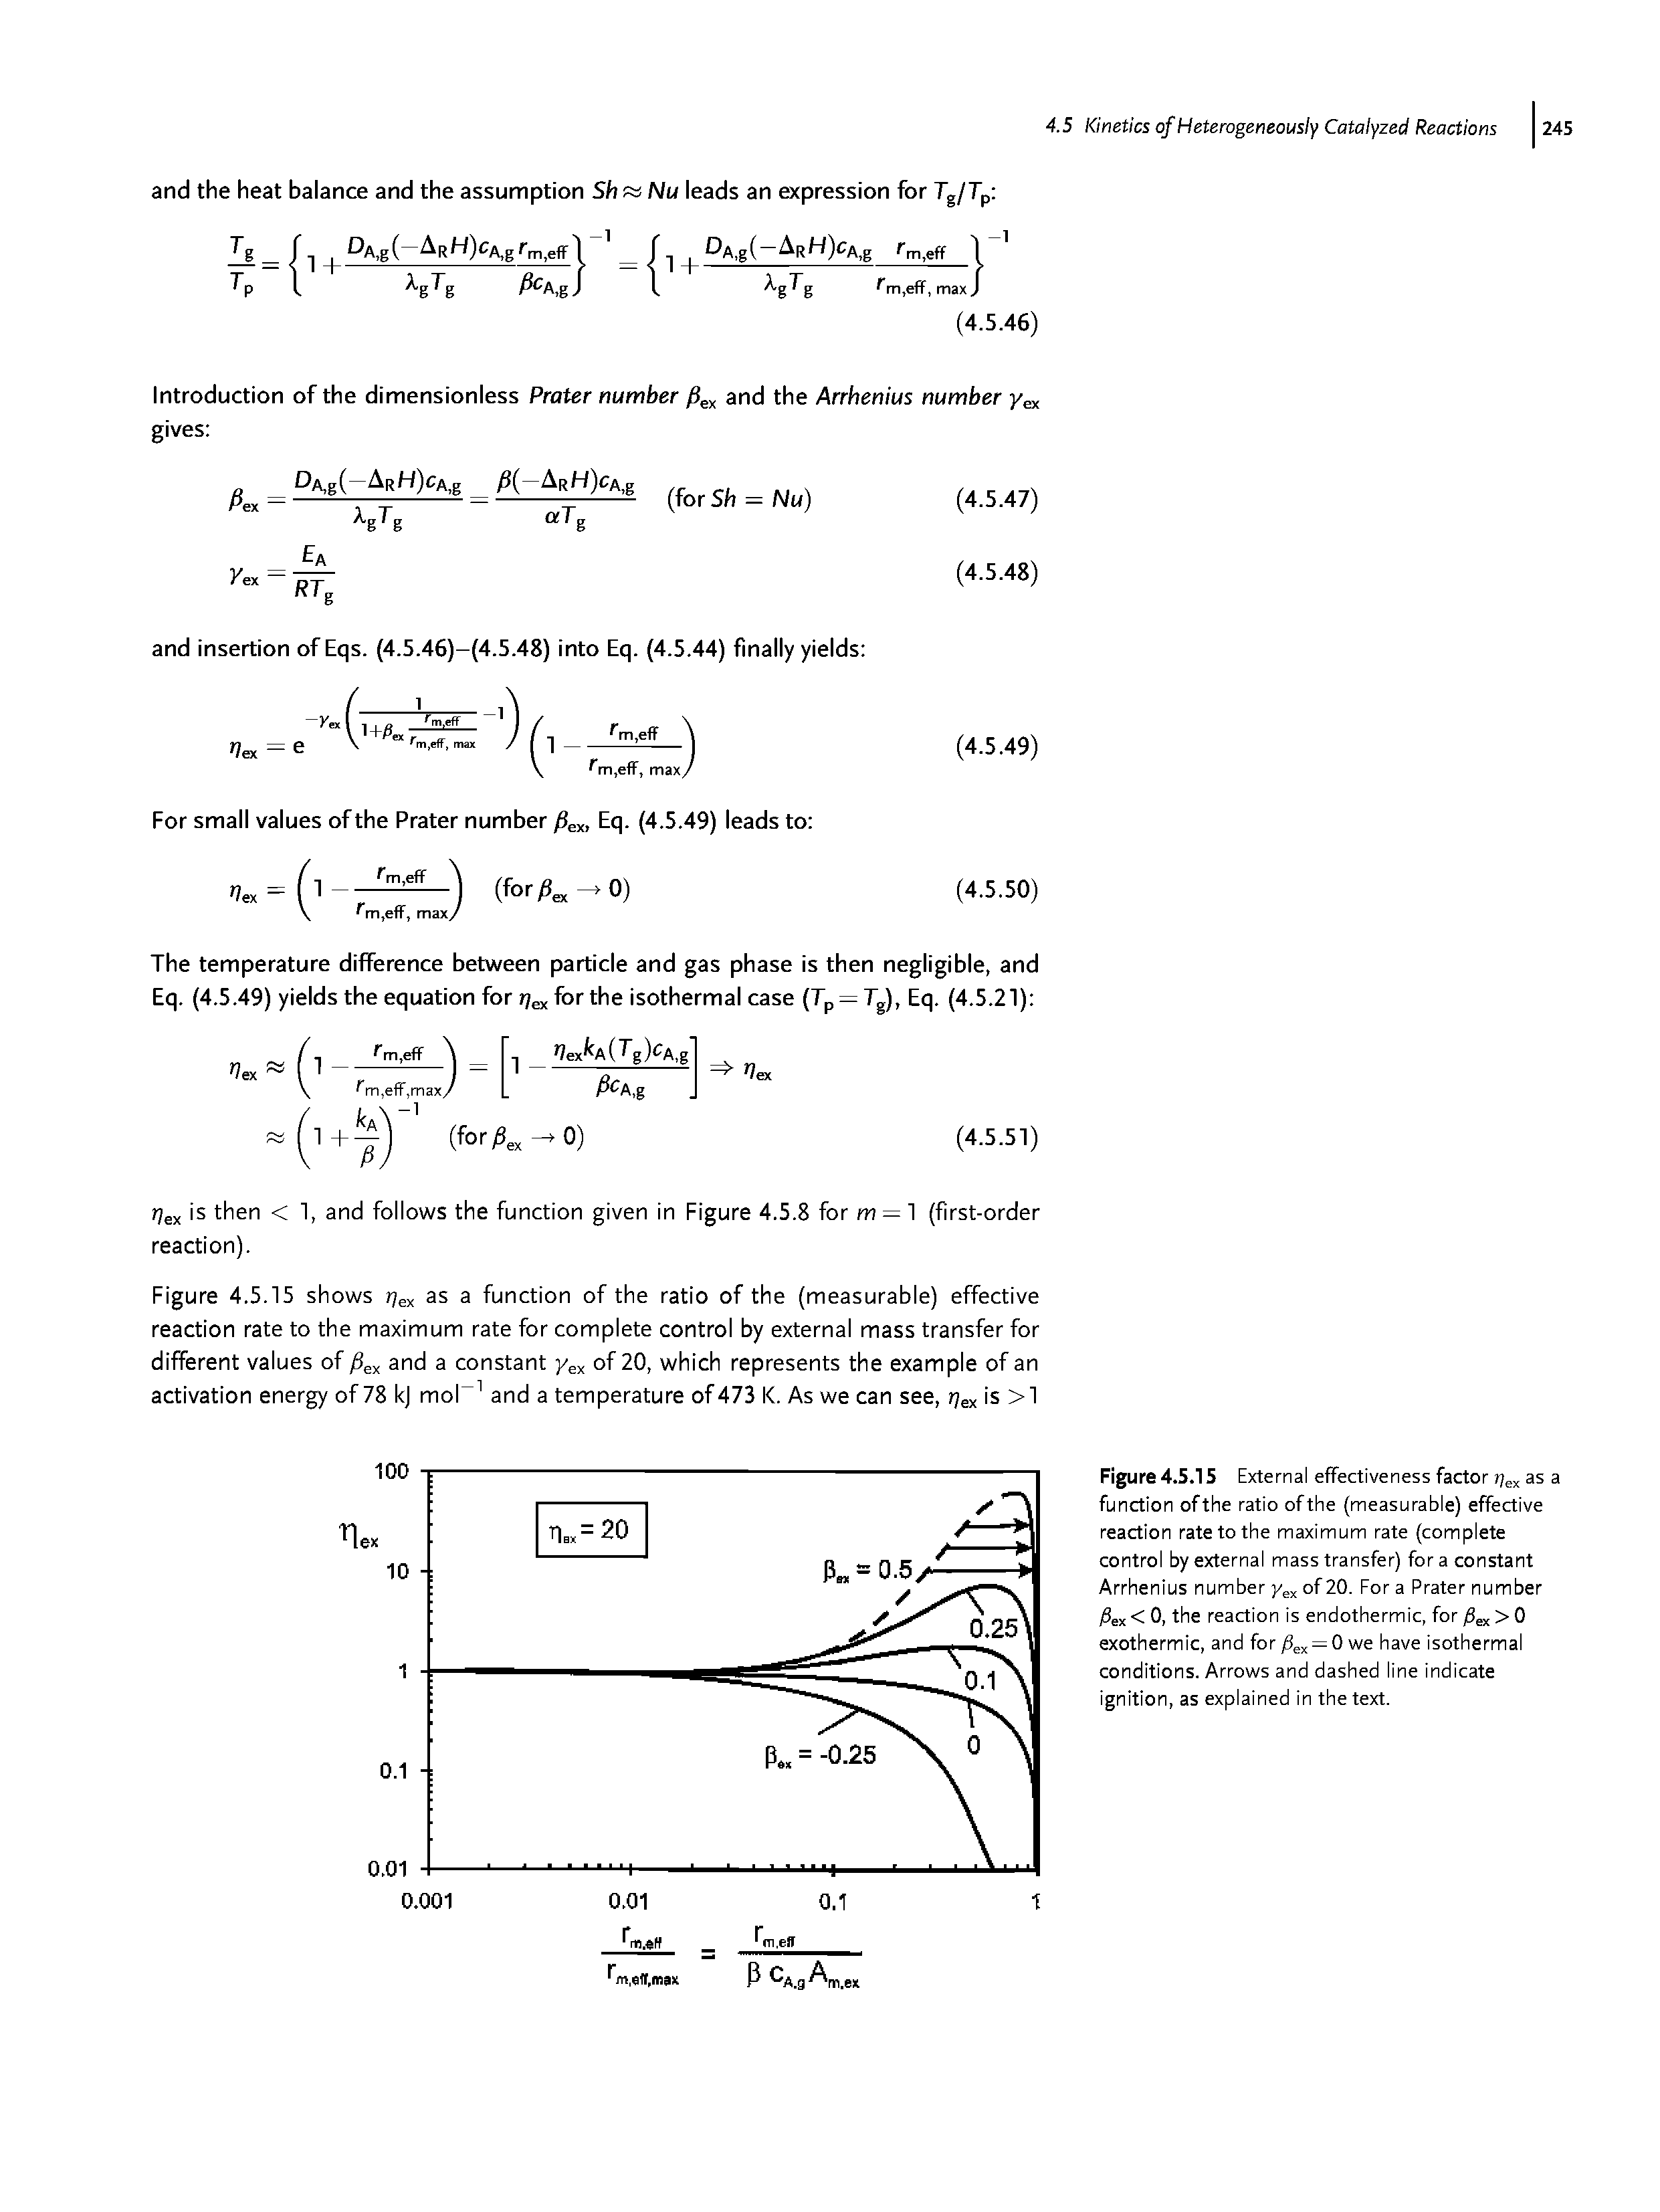 Figure 4.5.15 External effectiveness factor as a function ofthe ratio ofthe (measurable) effective reaction rate to the maximum rate (complete control by external mass transfer) fora constant Arrhenius number of 20. For a Prater number jSex < 0, the reaction is endothermic, for /Sex > 0 exothermic, and for /Sex = 0 we have isothermal conditions. Arrows and dashed line indicate ignition, as explained in the text.